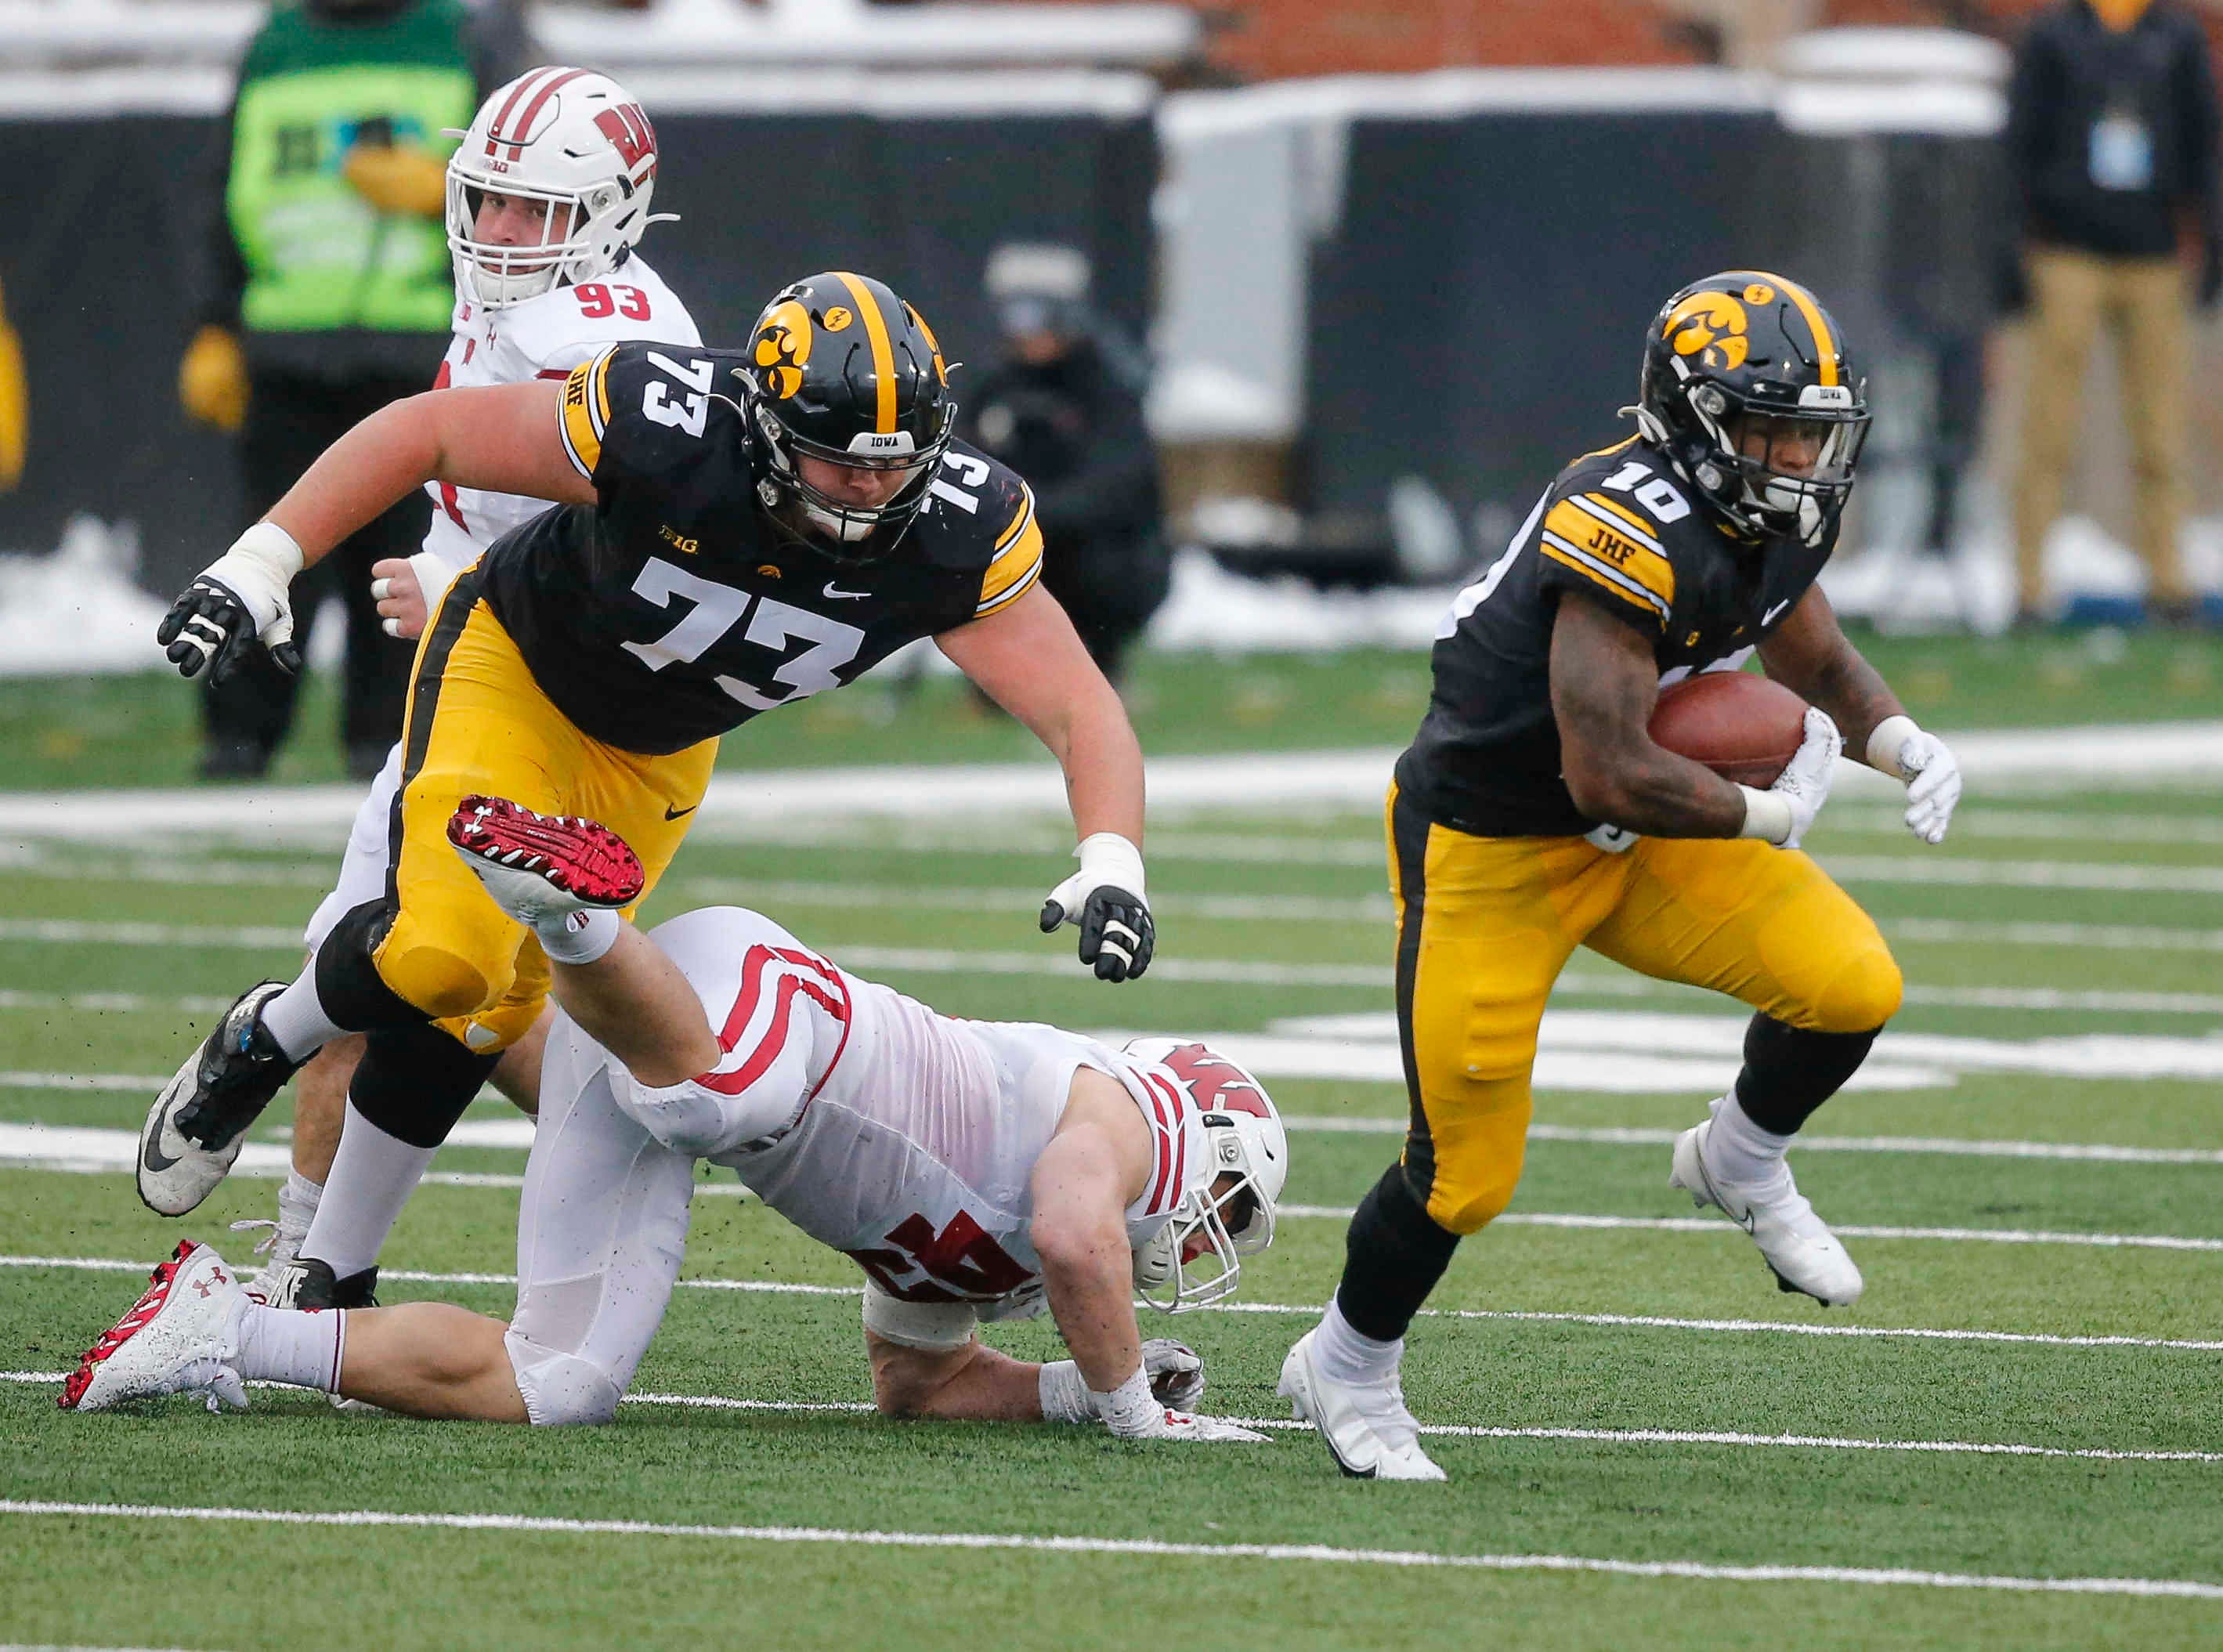 Iowa senior running back Mekhi Sargent runs the ball as left guard Cody Ince flattens a Wisconsin defender in the first quarter on Saturday, Dec. 12, 2020, at Kinnick Stadium in Iowa City, Iowa.